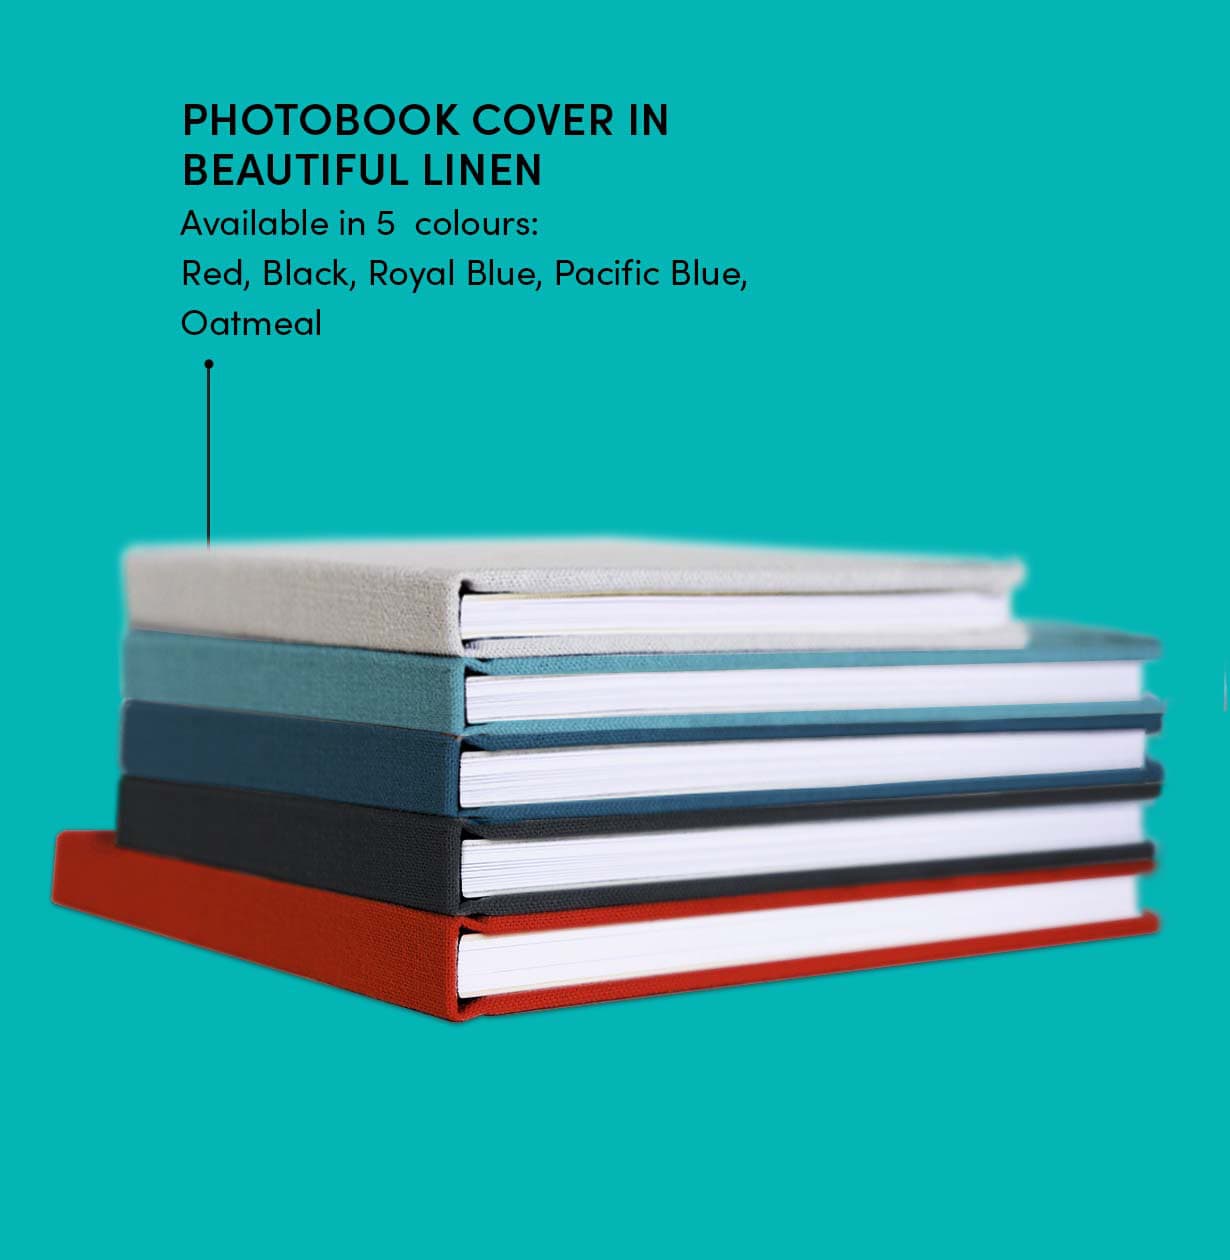 Linen Cover Options for Layflat Photo Books